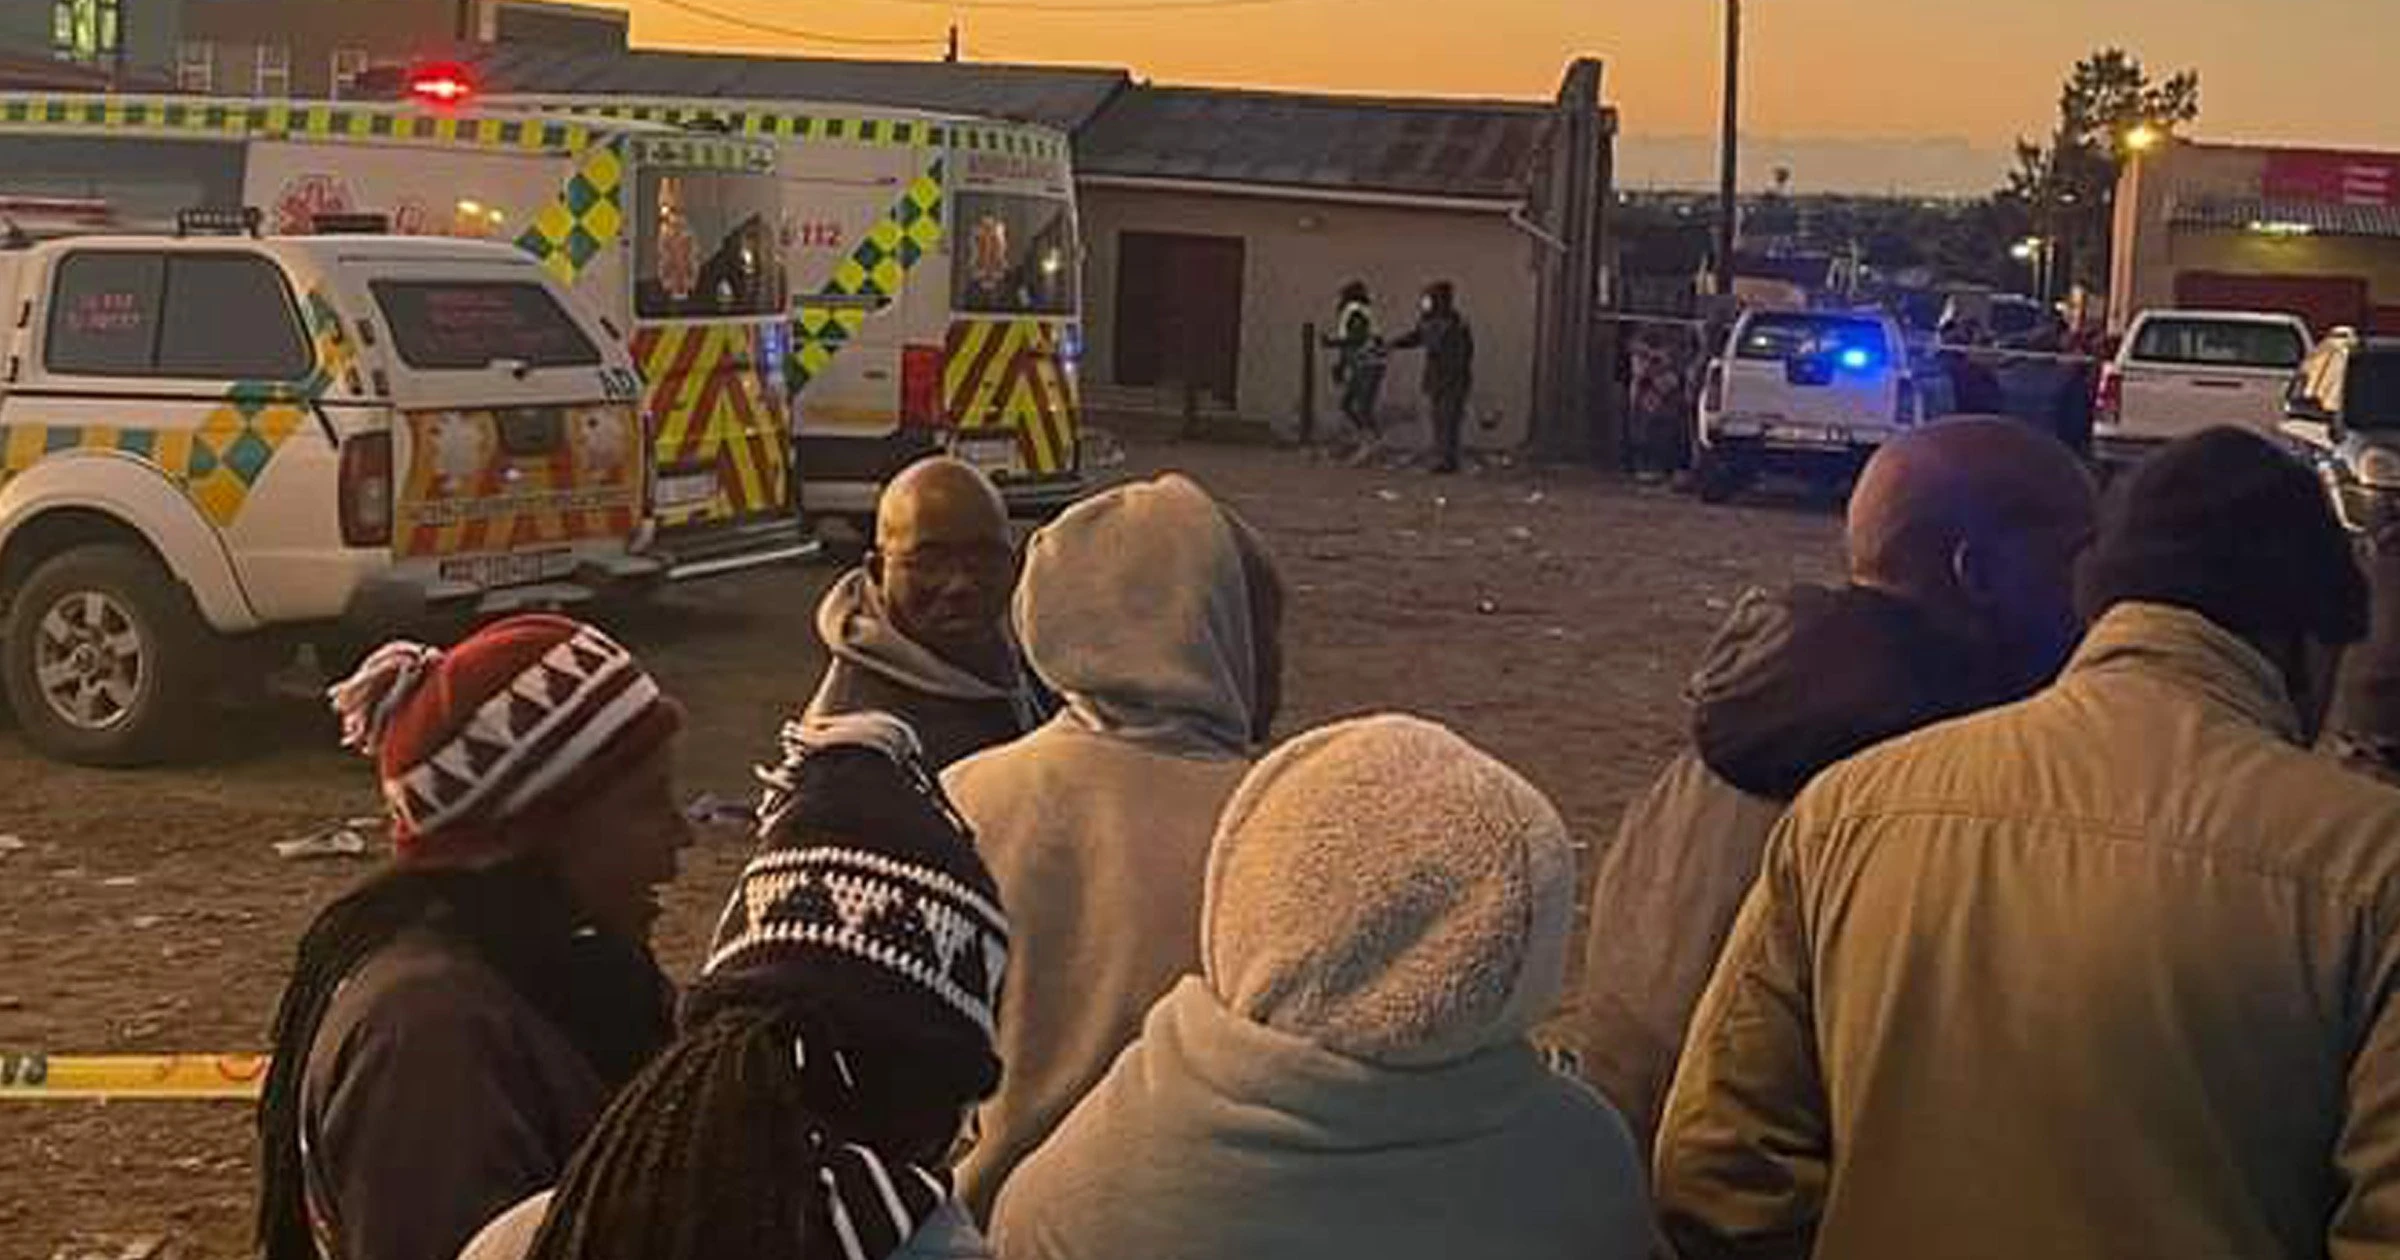 At least 17 people were found dead at a nightclub in South Africa's southern city of East London | 17 People Found Dead in Night Club South Africa News in Hindi